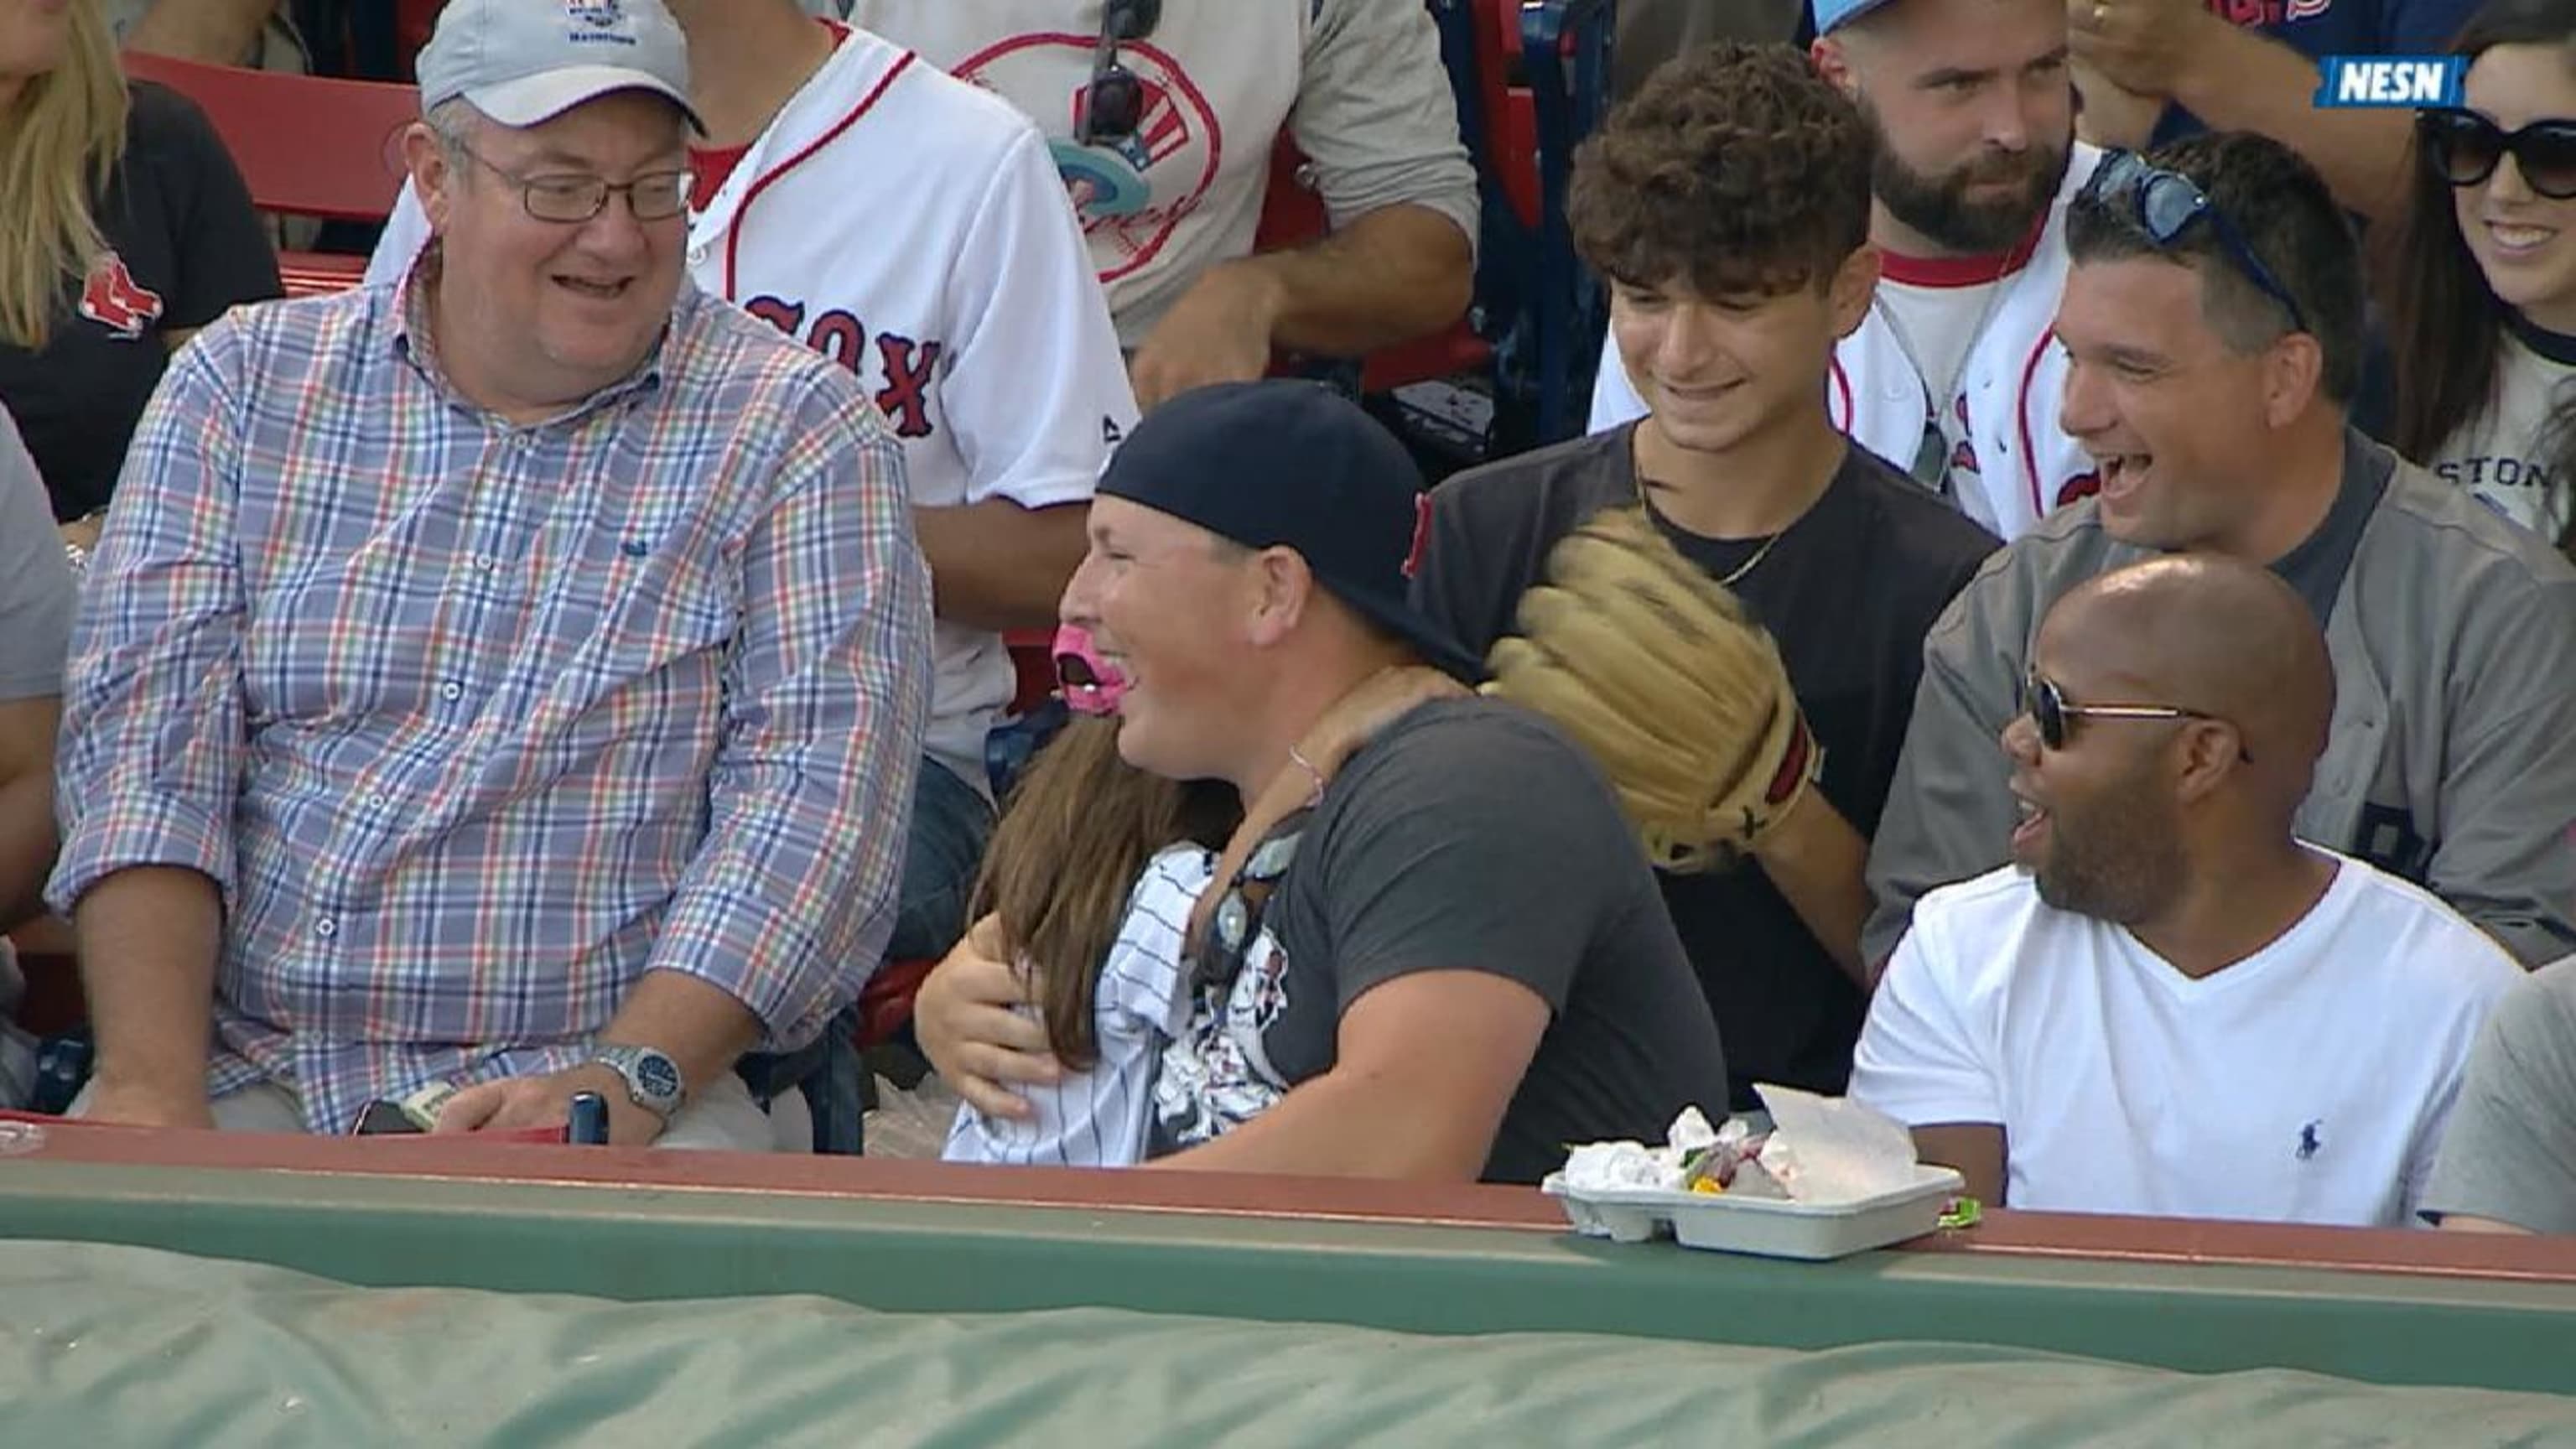 A young Yankees fan and an adult Red Sox fan made us all say 'Aw' with this  precious moment